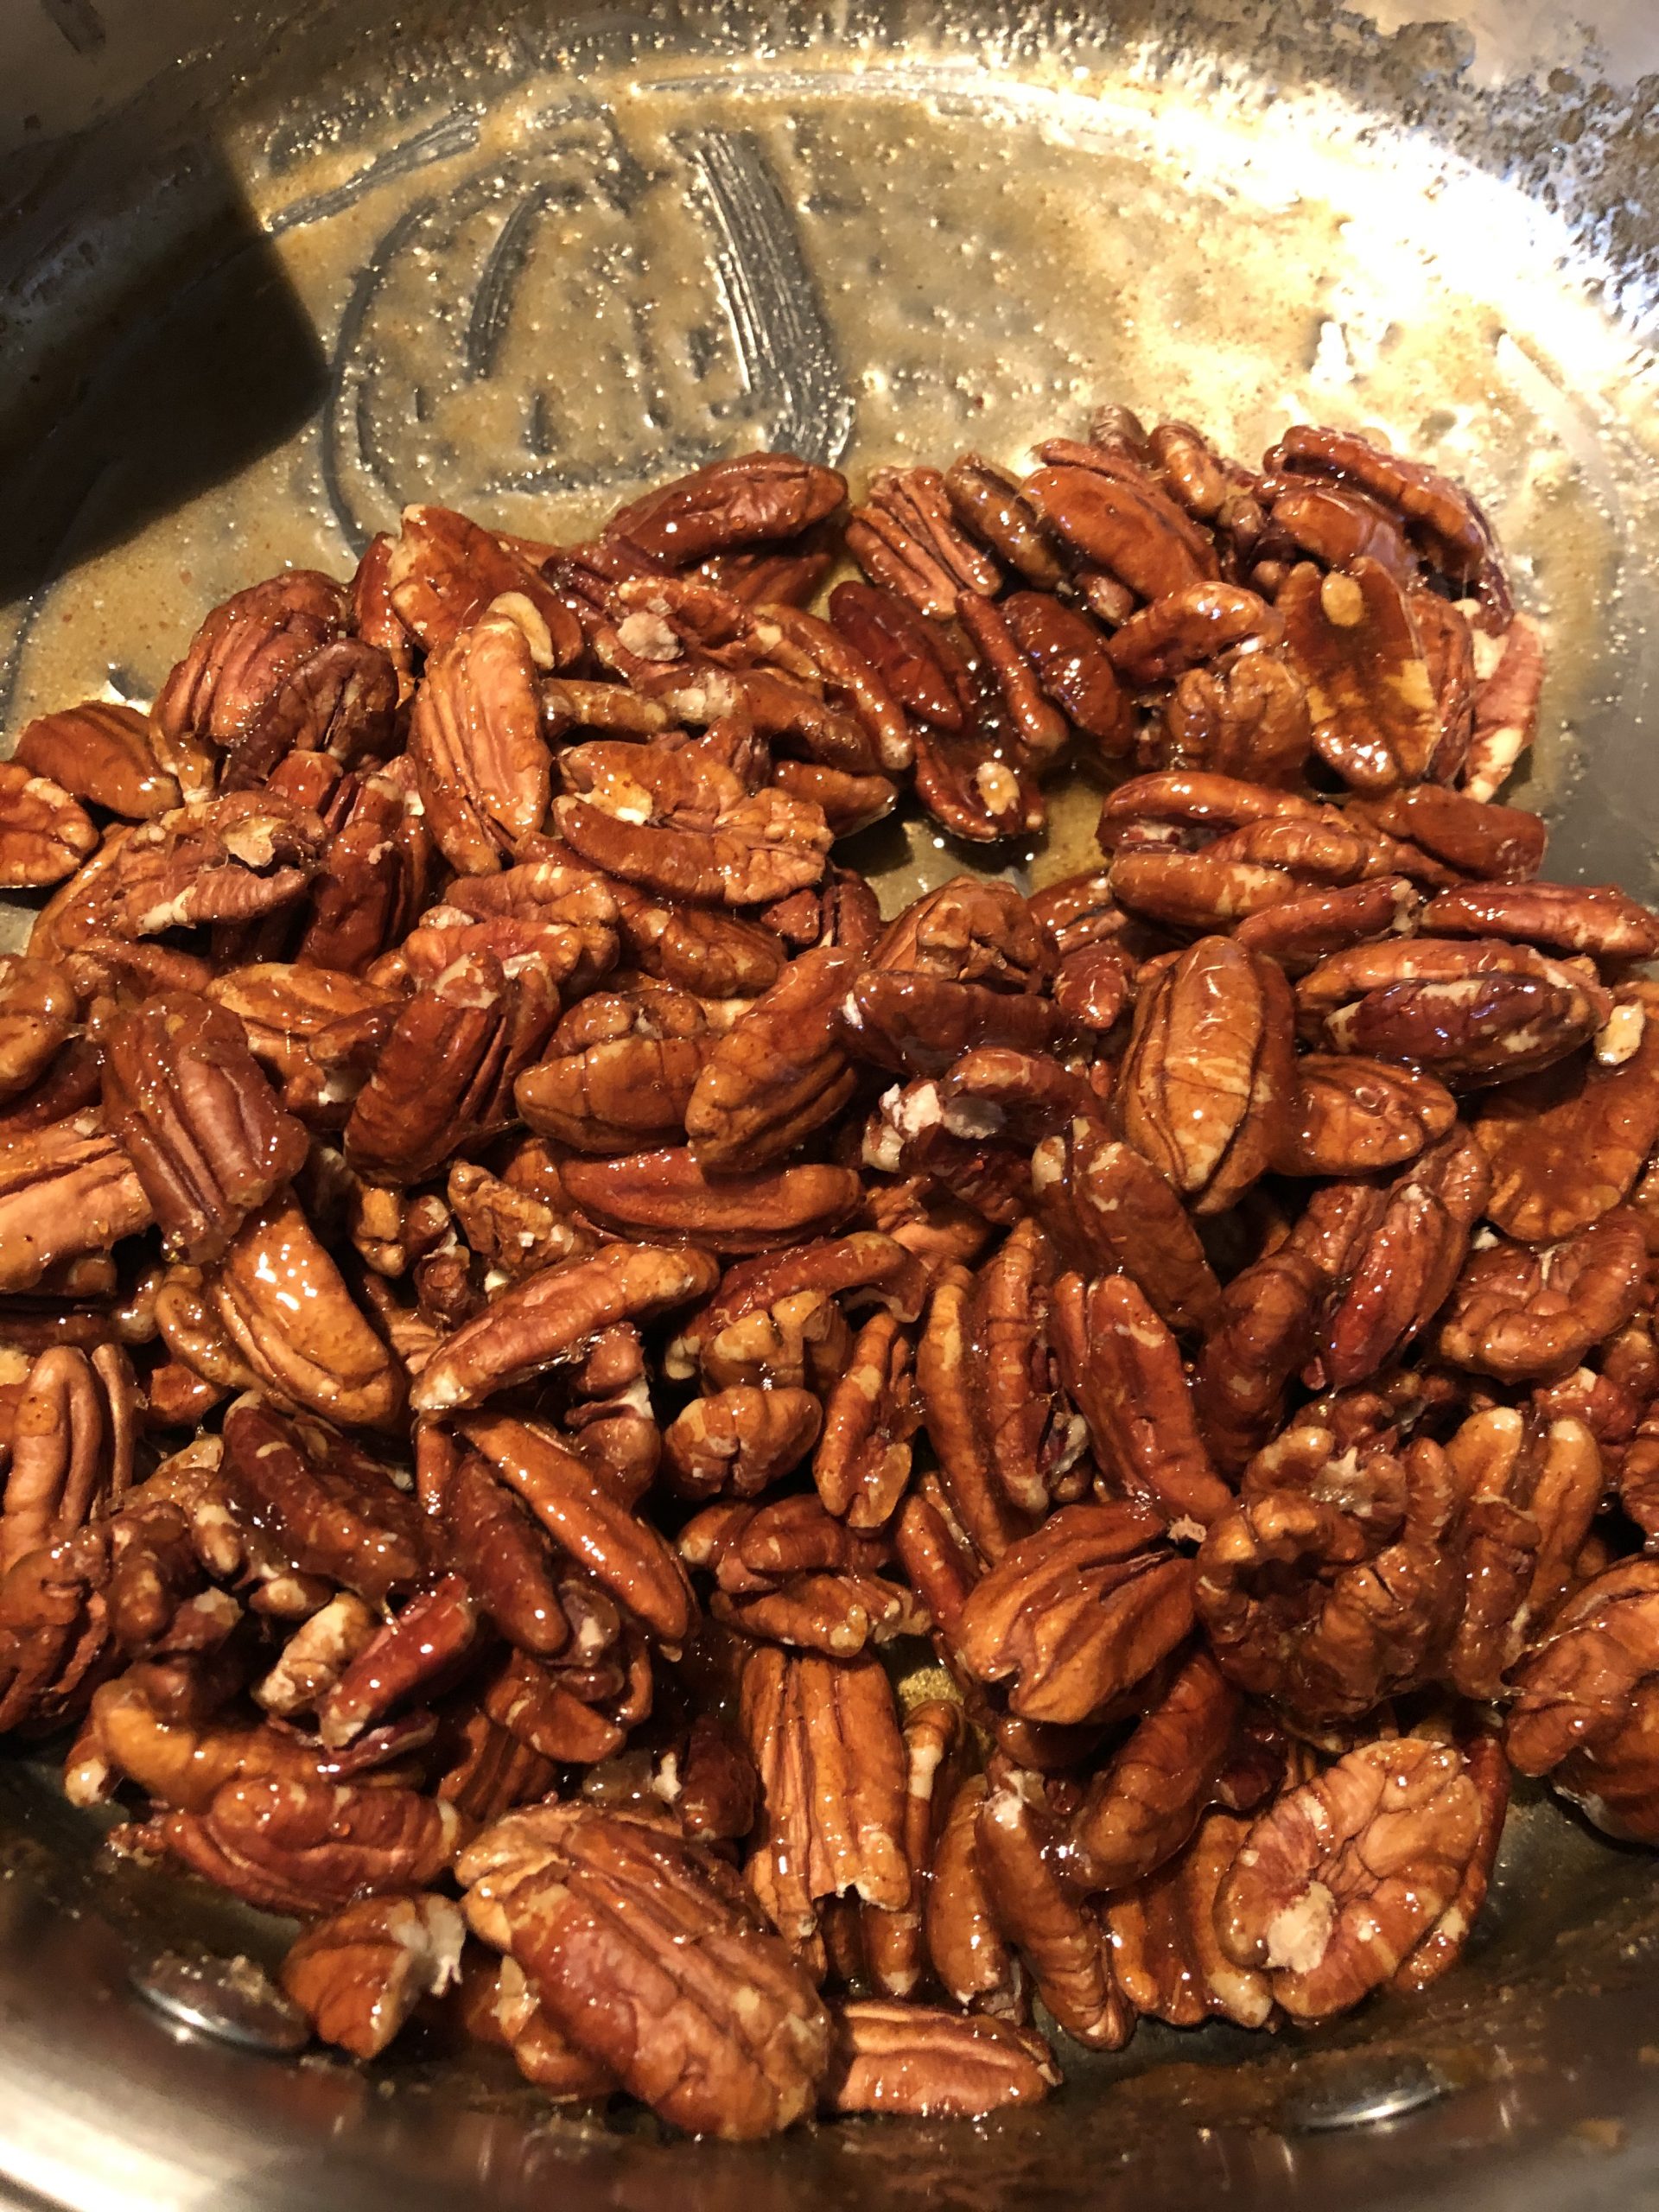 Add pecans to syrup